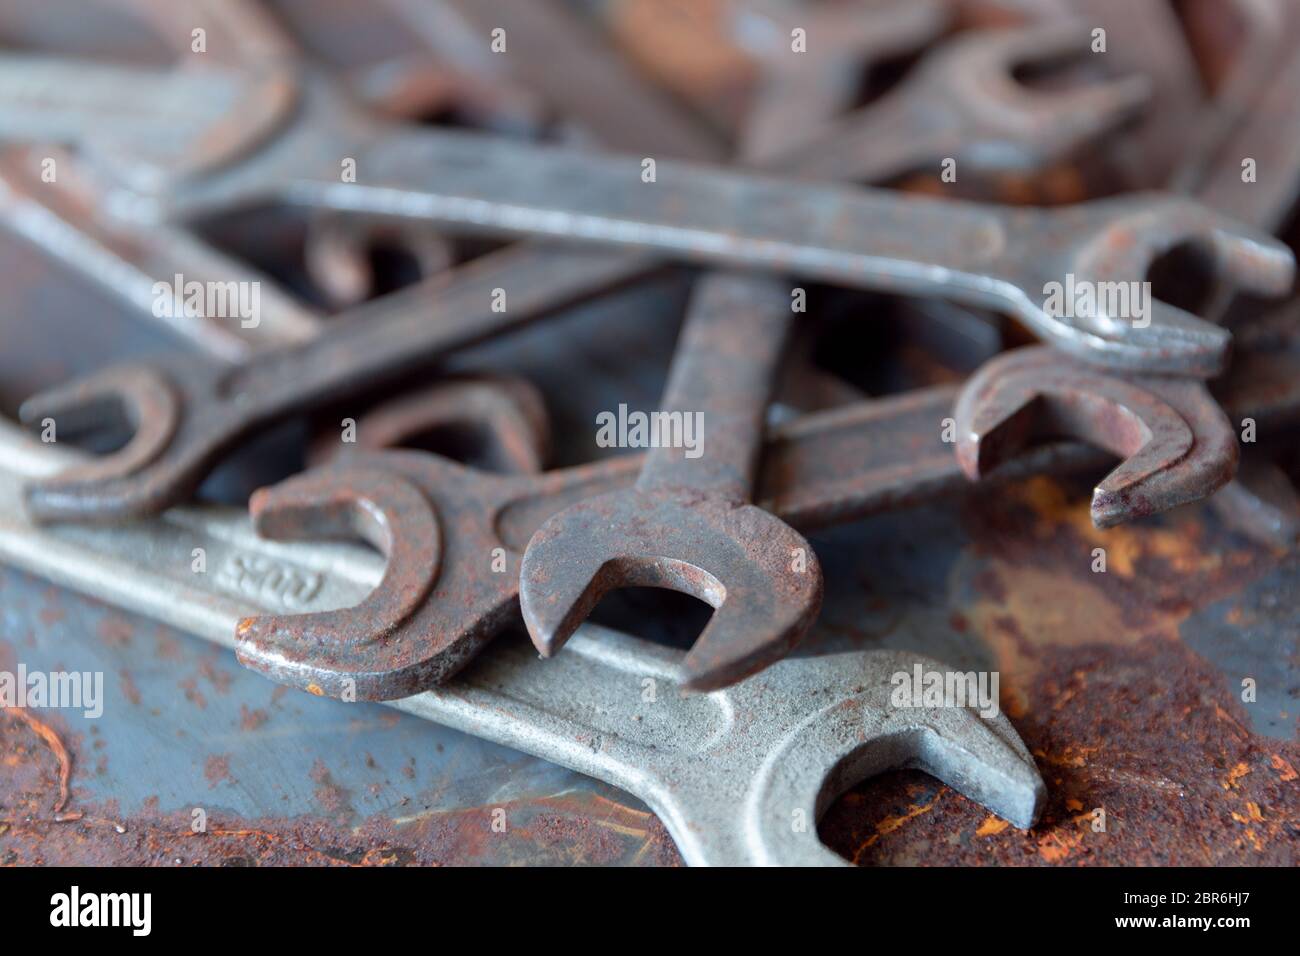 Old rusty wrench over battered metal table rough style. Wrenches top view for construction, industrial, electrician concept design Stock Photo